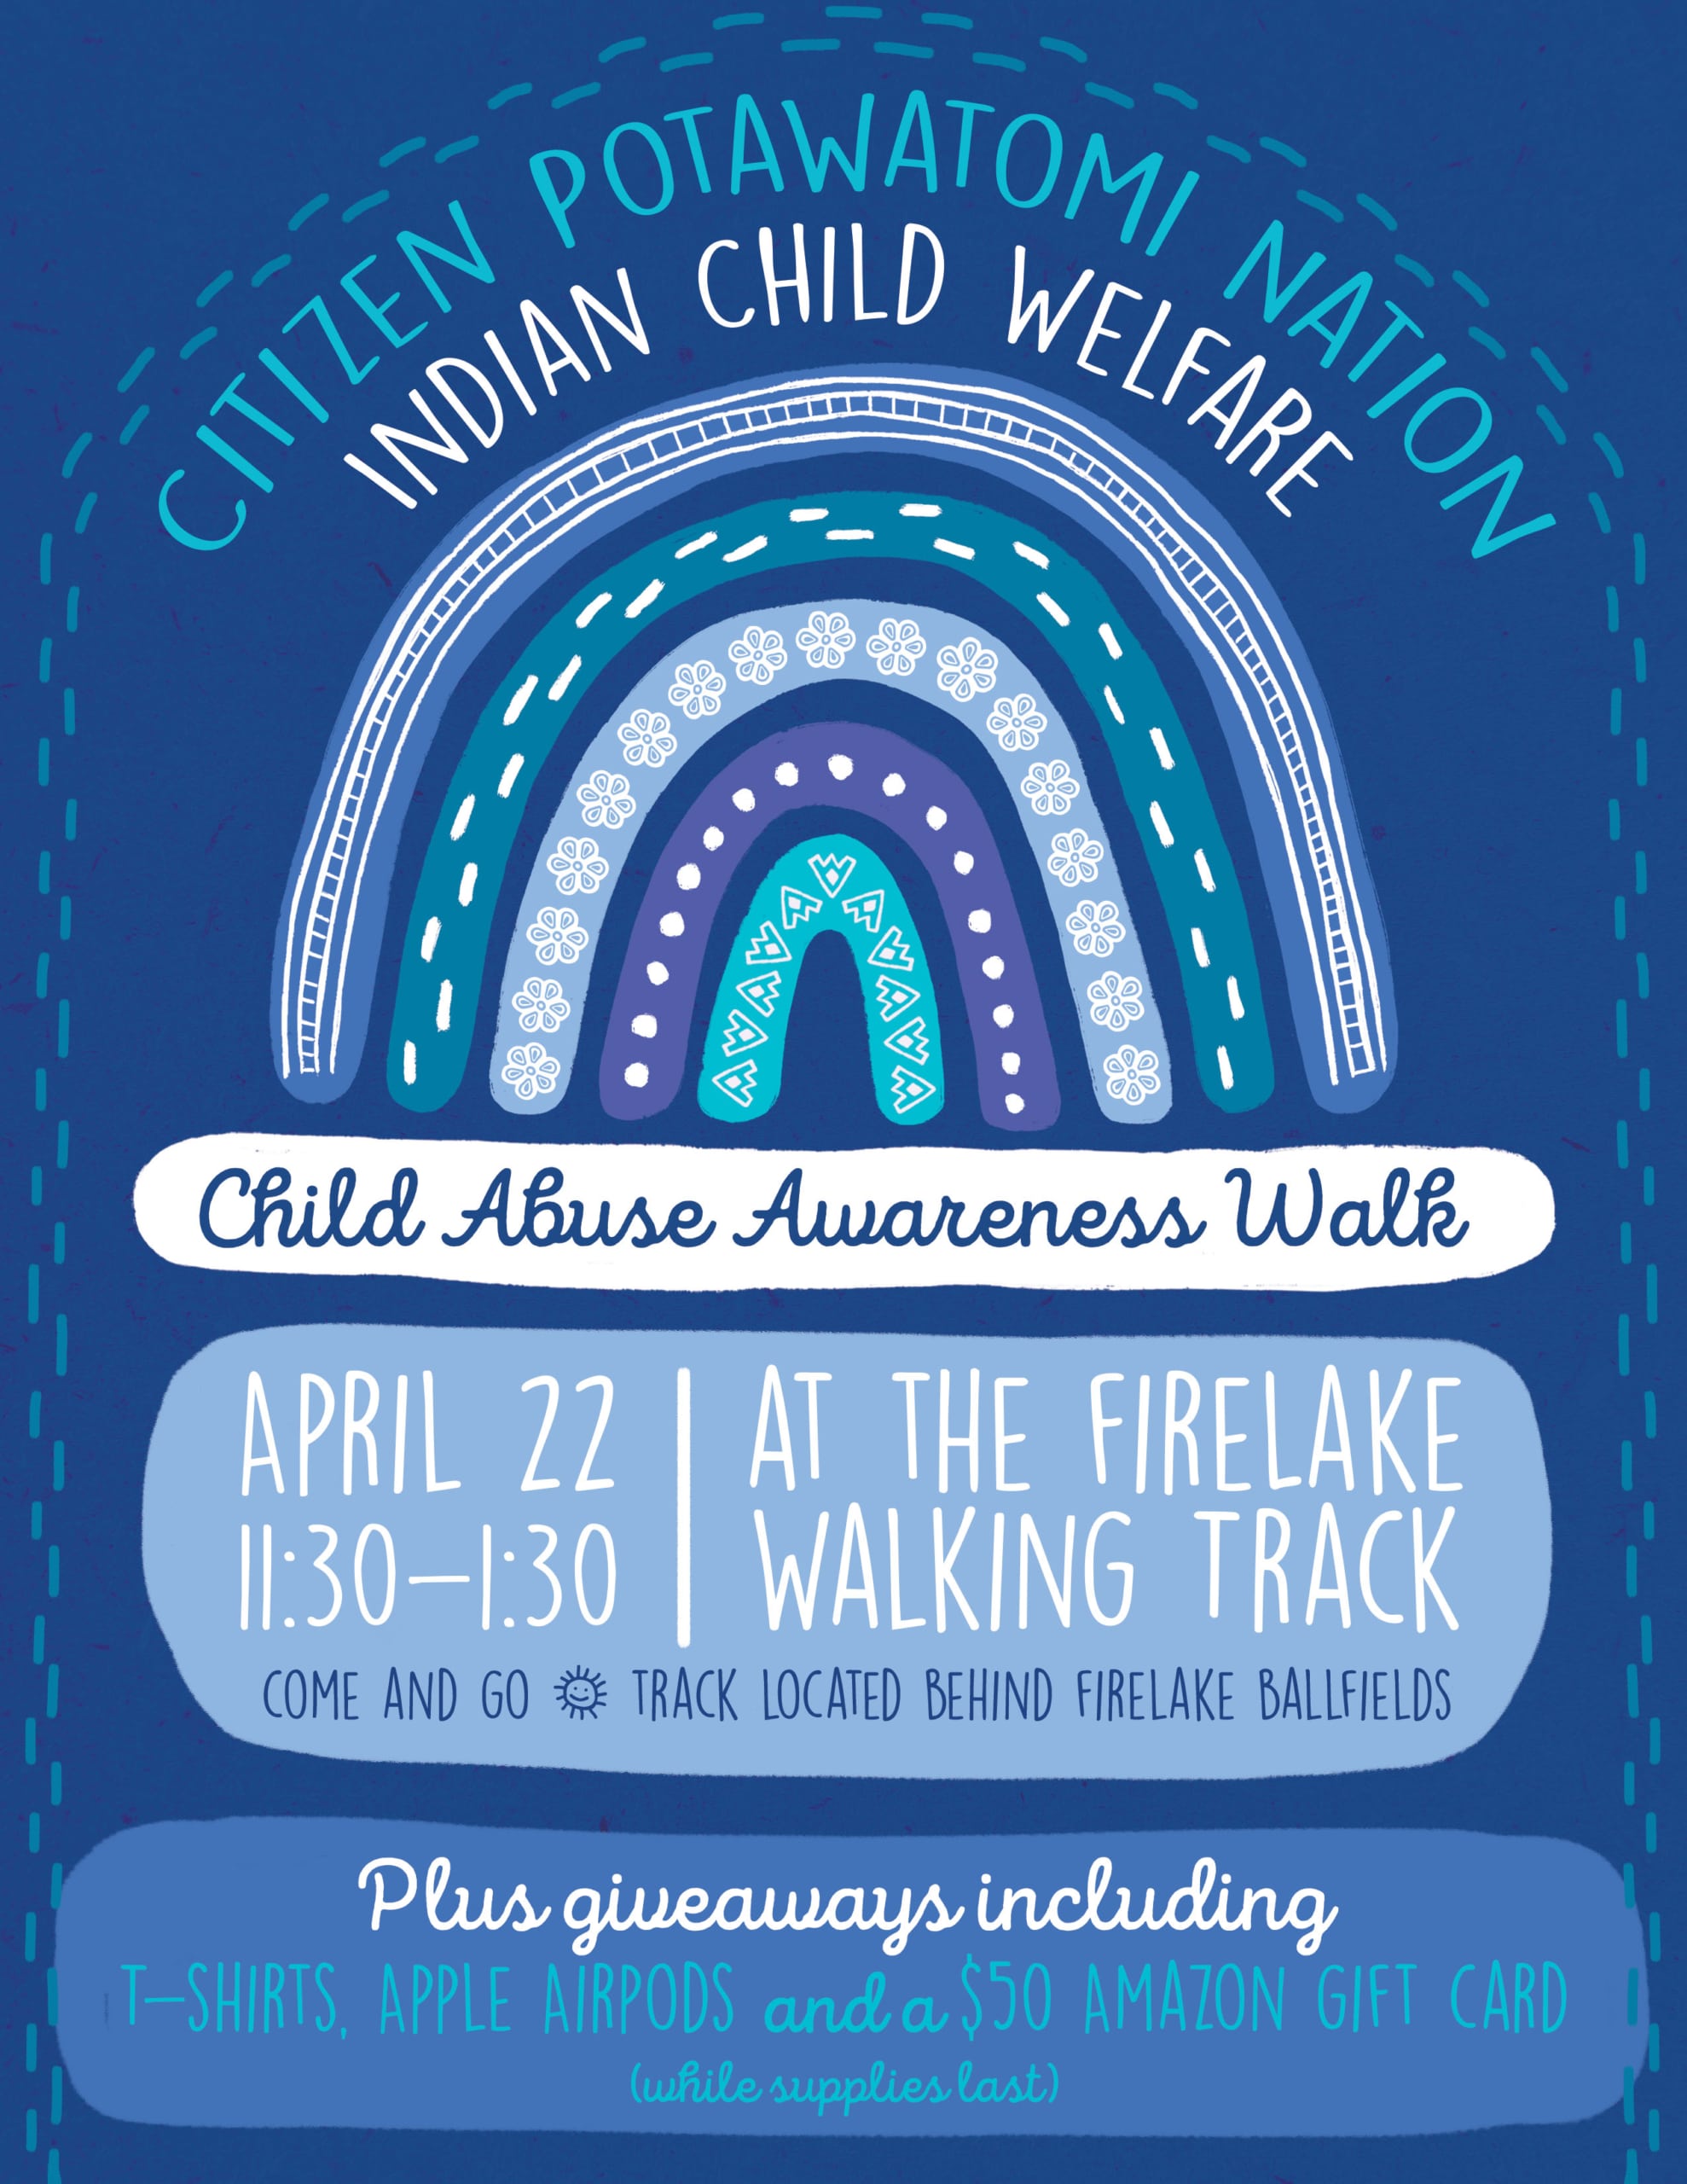 A blue flyer with a rainbow sketch design in shades of blue invites participants to the CPN ICW Child Abuse Awareness Walk on April 22, 2022.